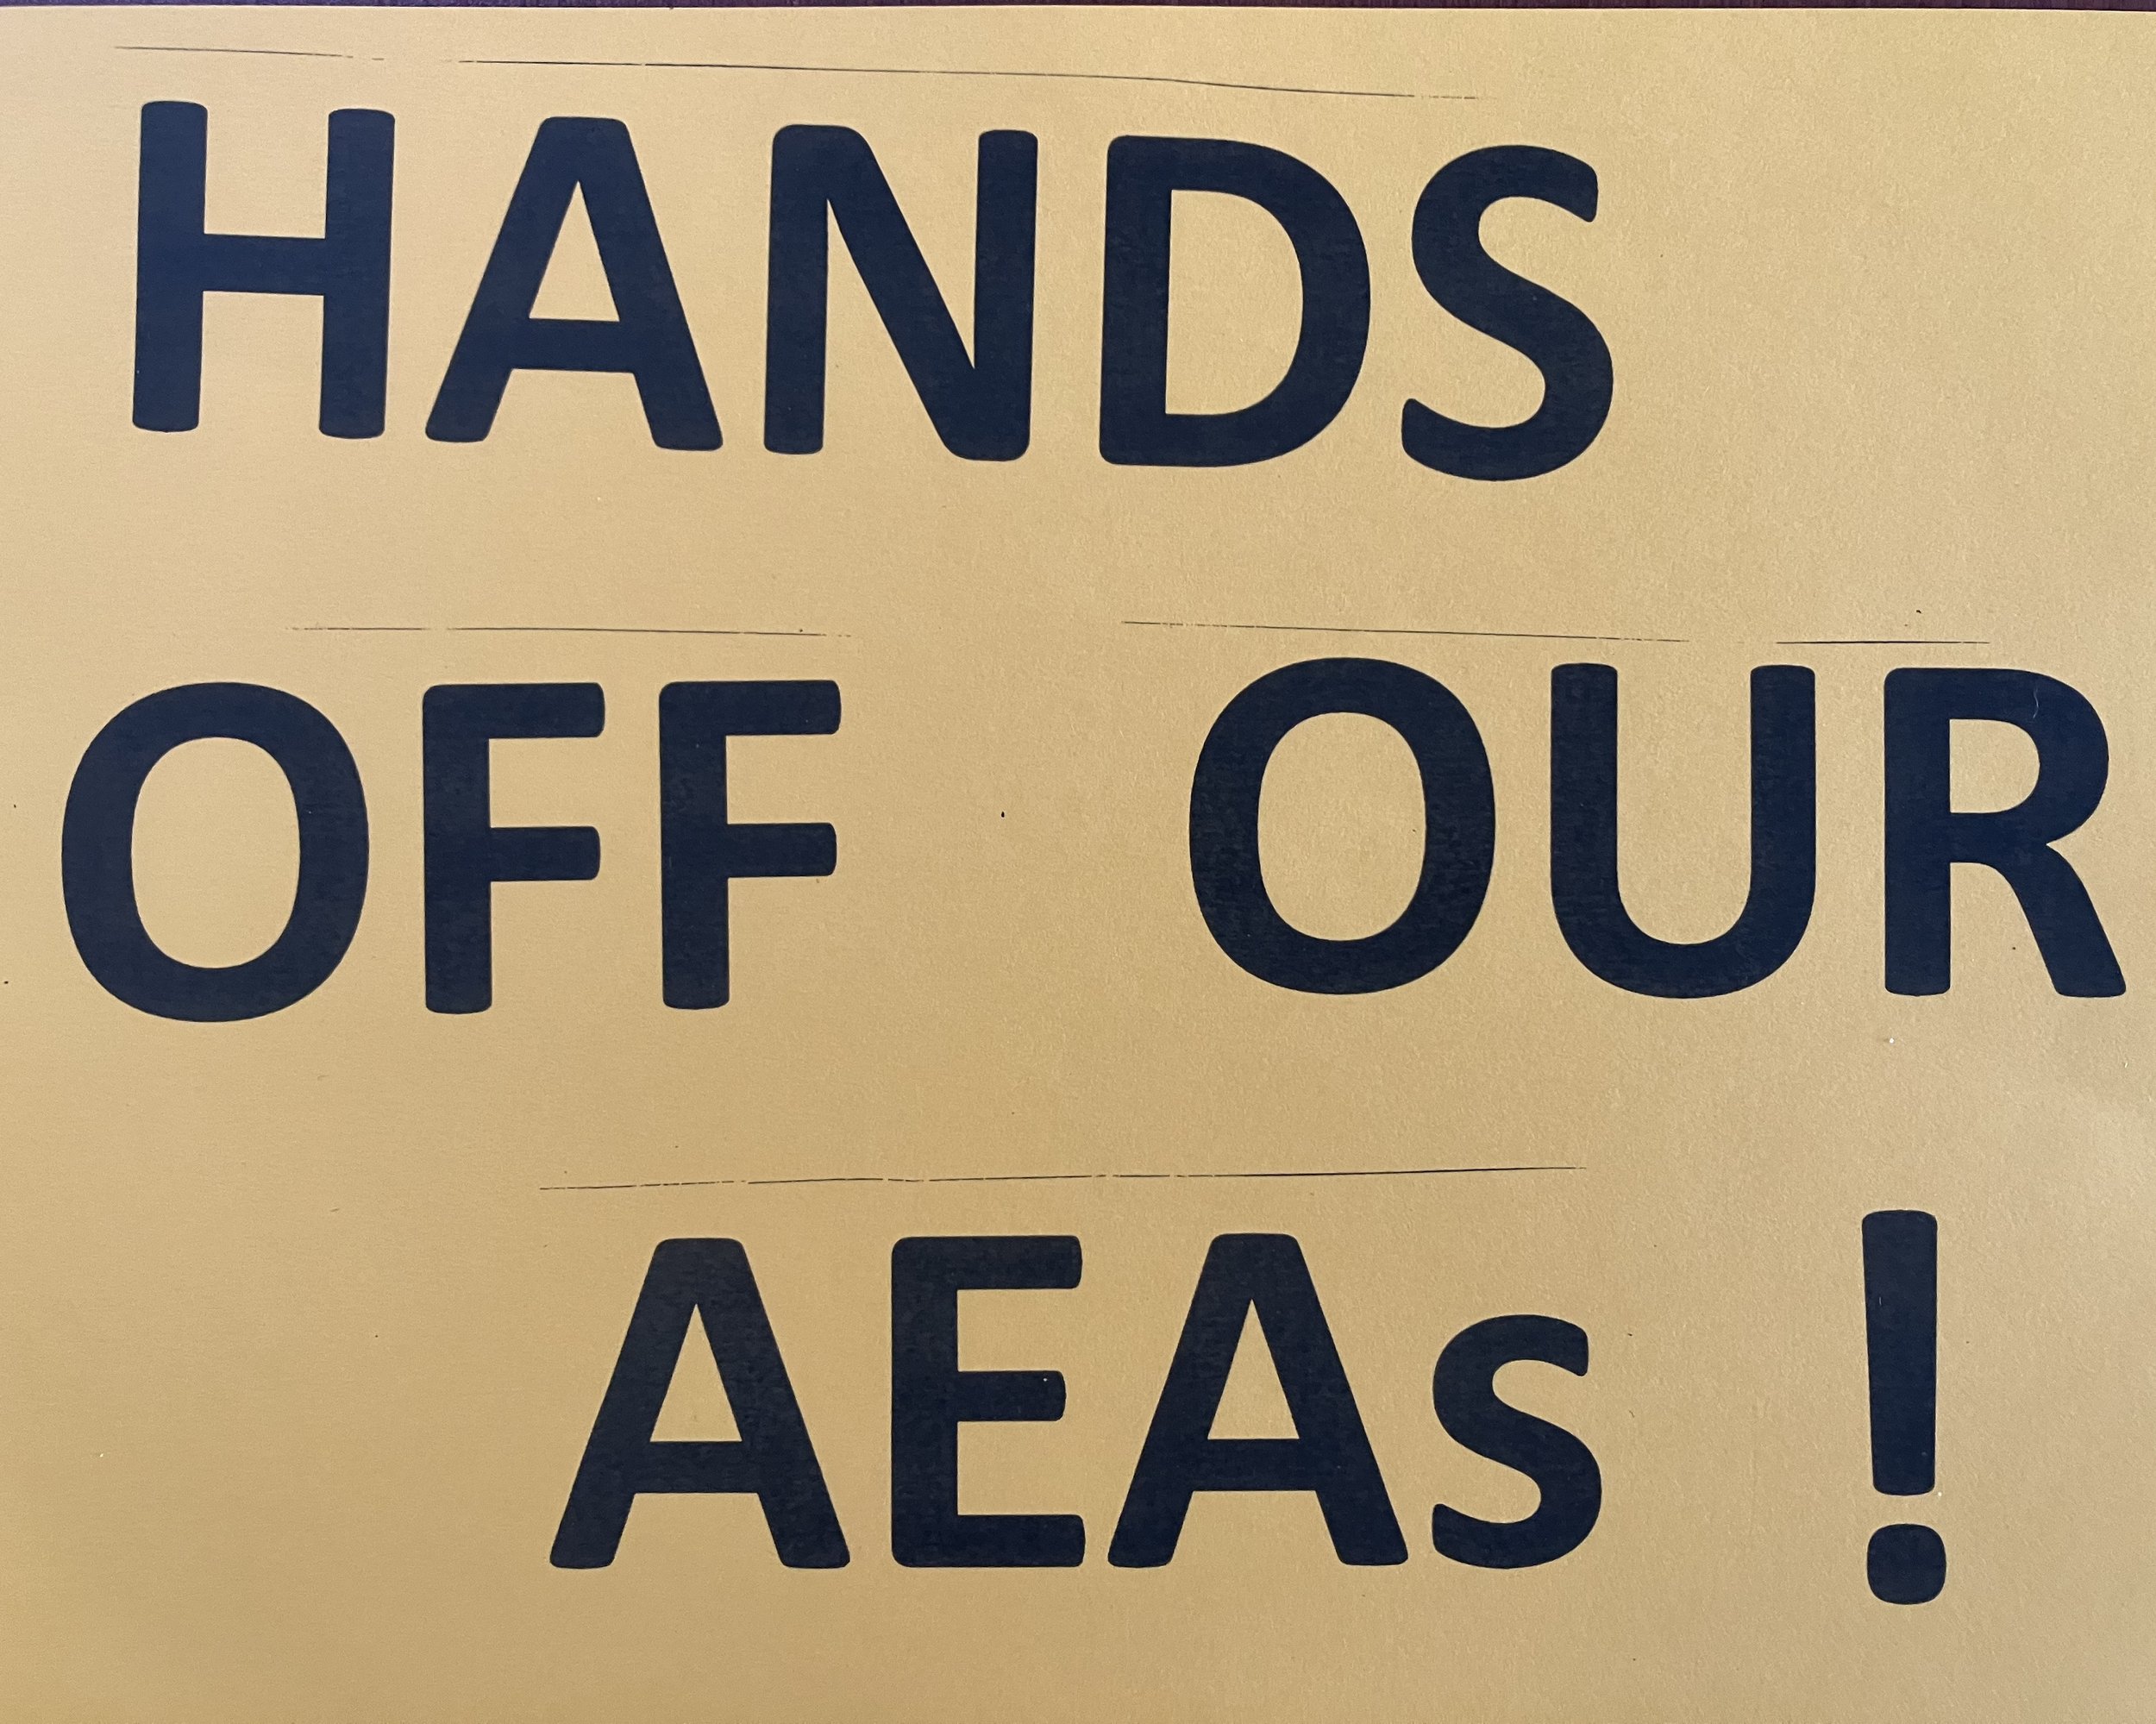 Don’t rush changes to AEAs